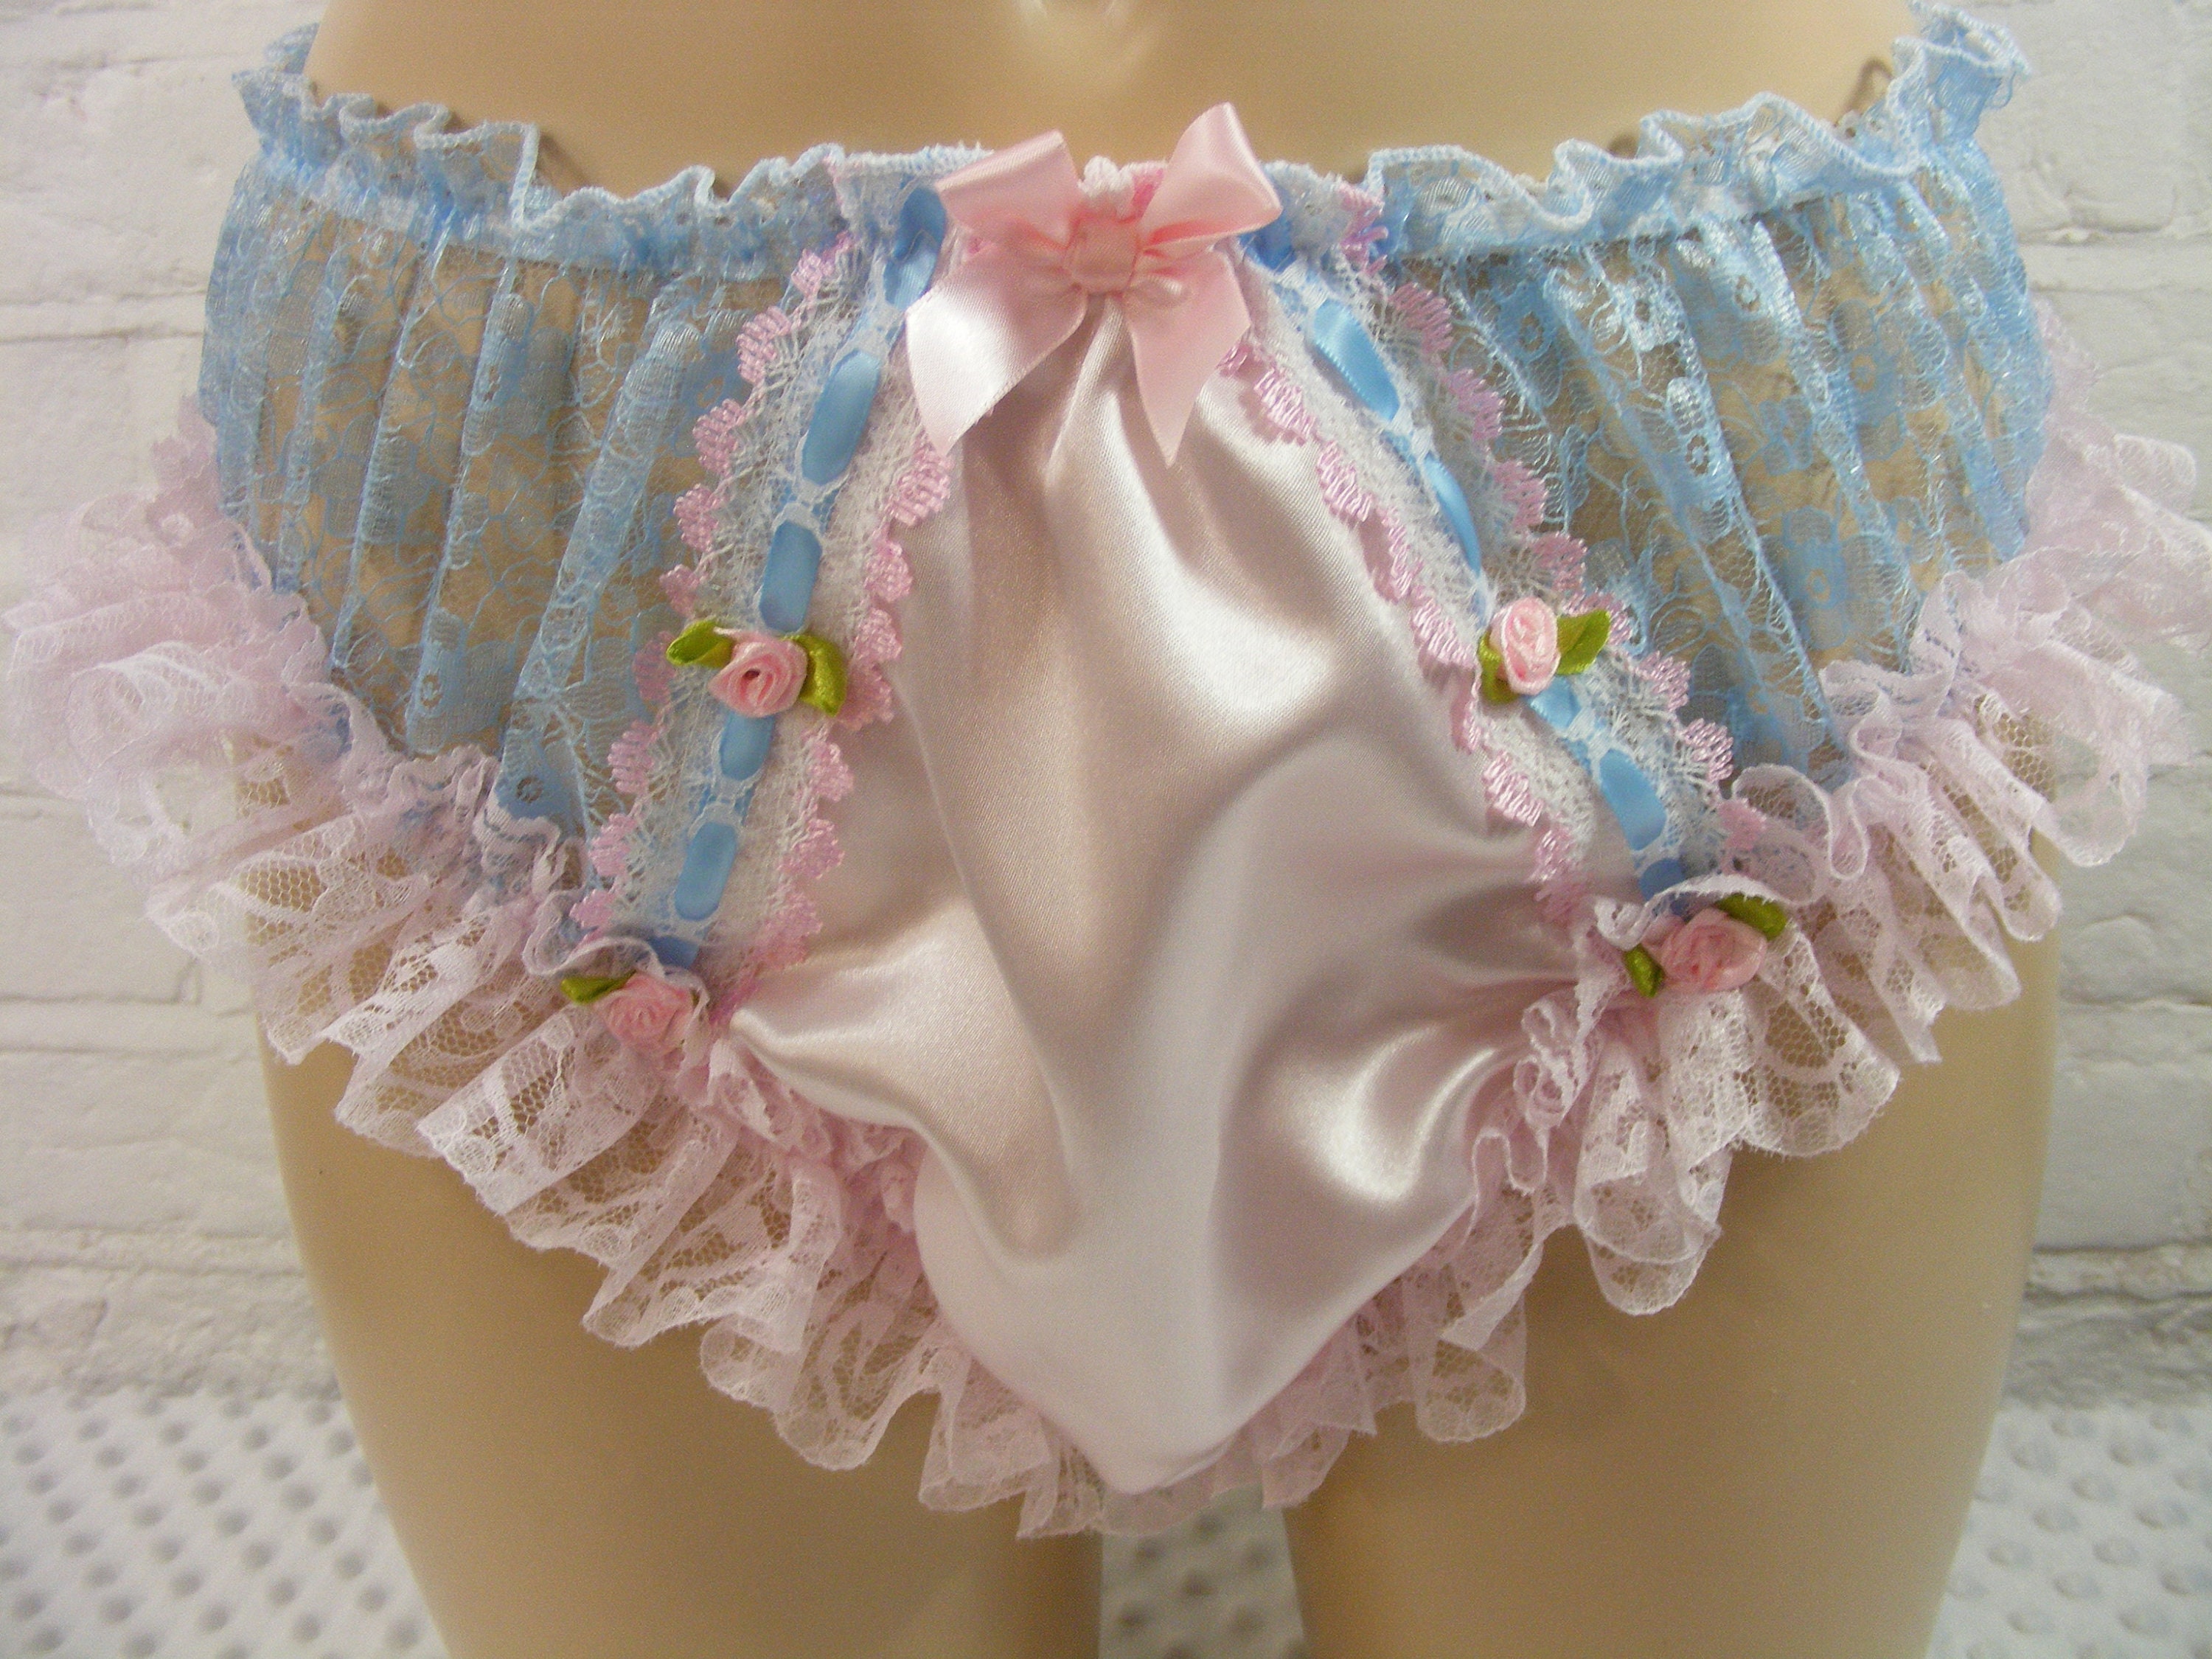 Sissy satin lace frilly panties knickers lingerie plus sizes